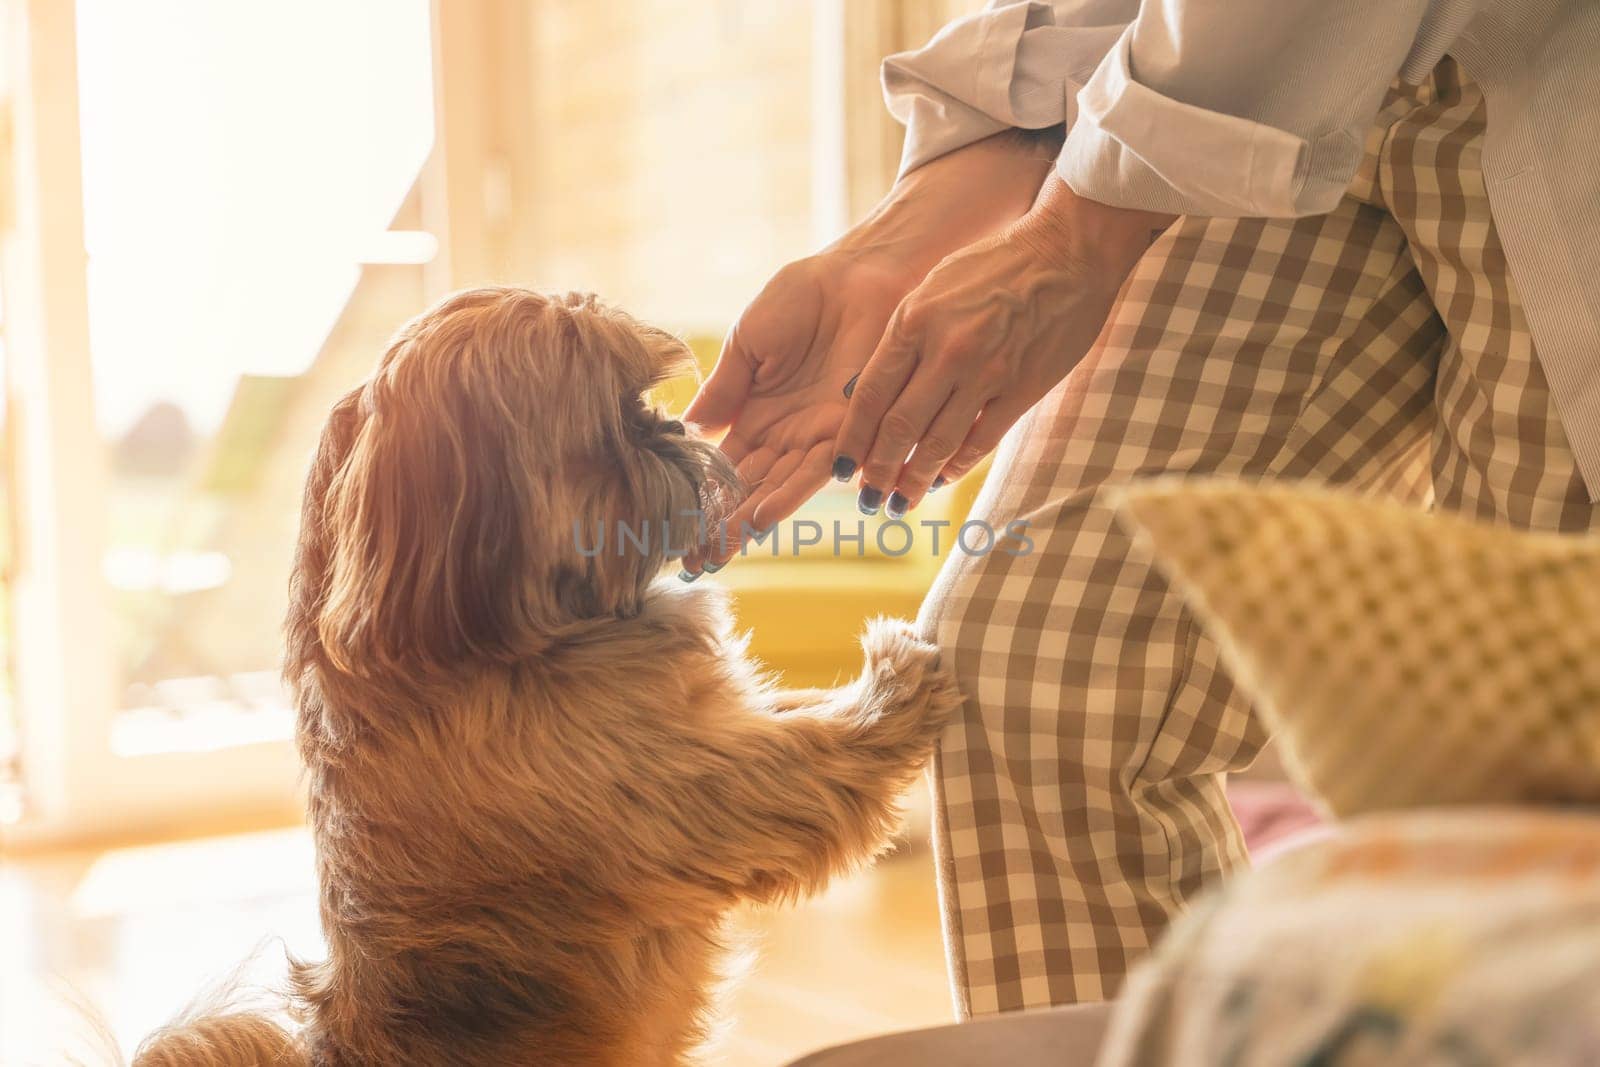 woman having fun and relaxing time at home with shih tzu dog. Free and happy time at home concept